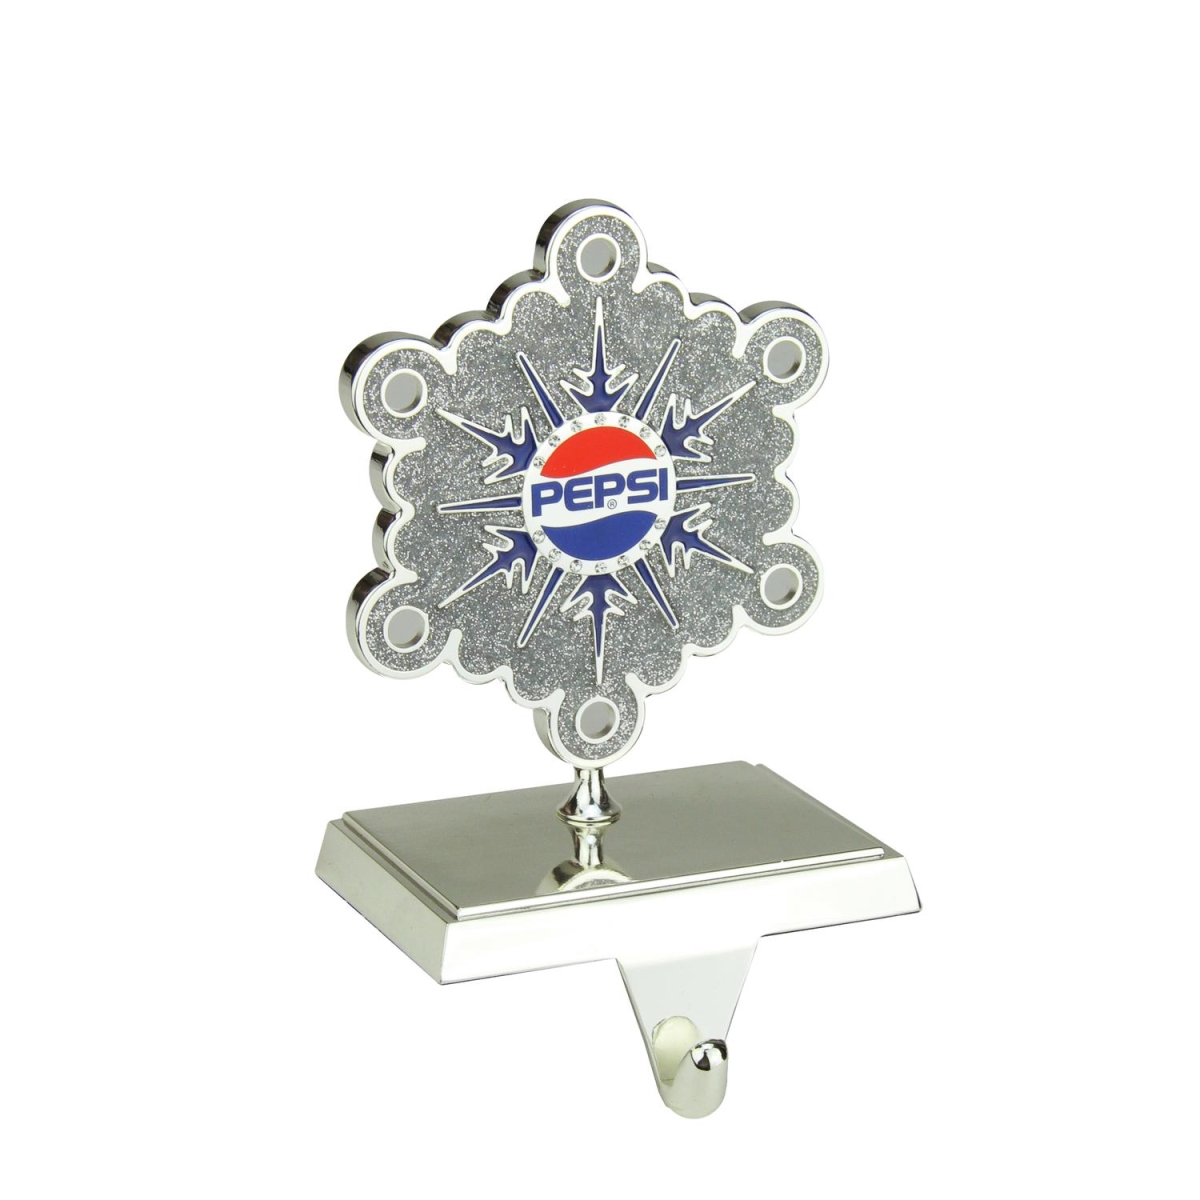 32279777 6.5 In. Pepsi Snowflake Christmas Stocking Holder With European Crystals - Silver Plated